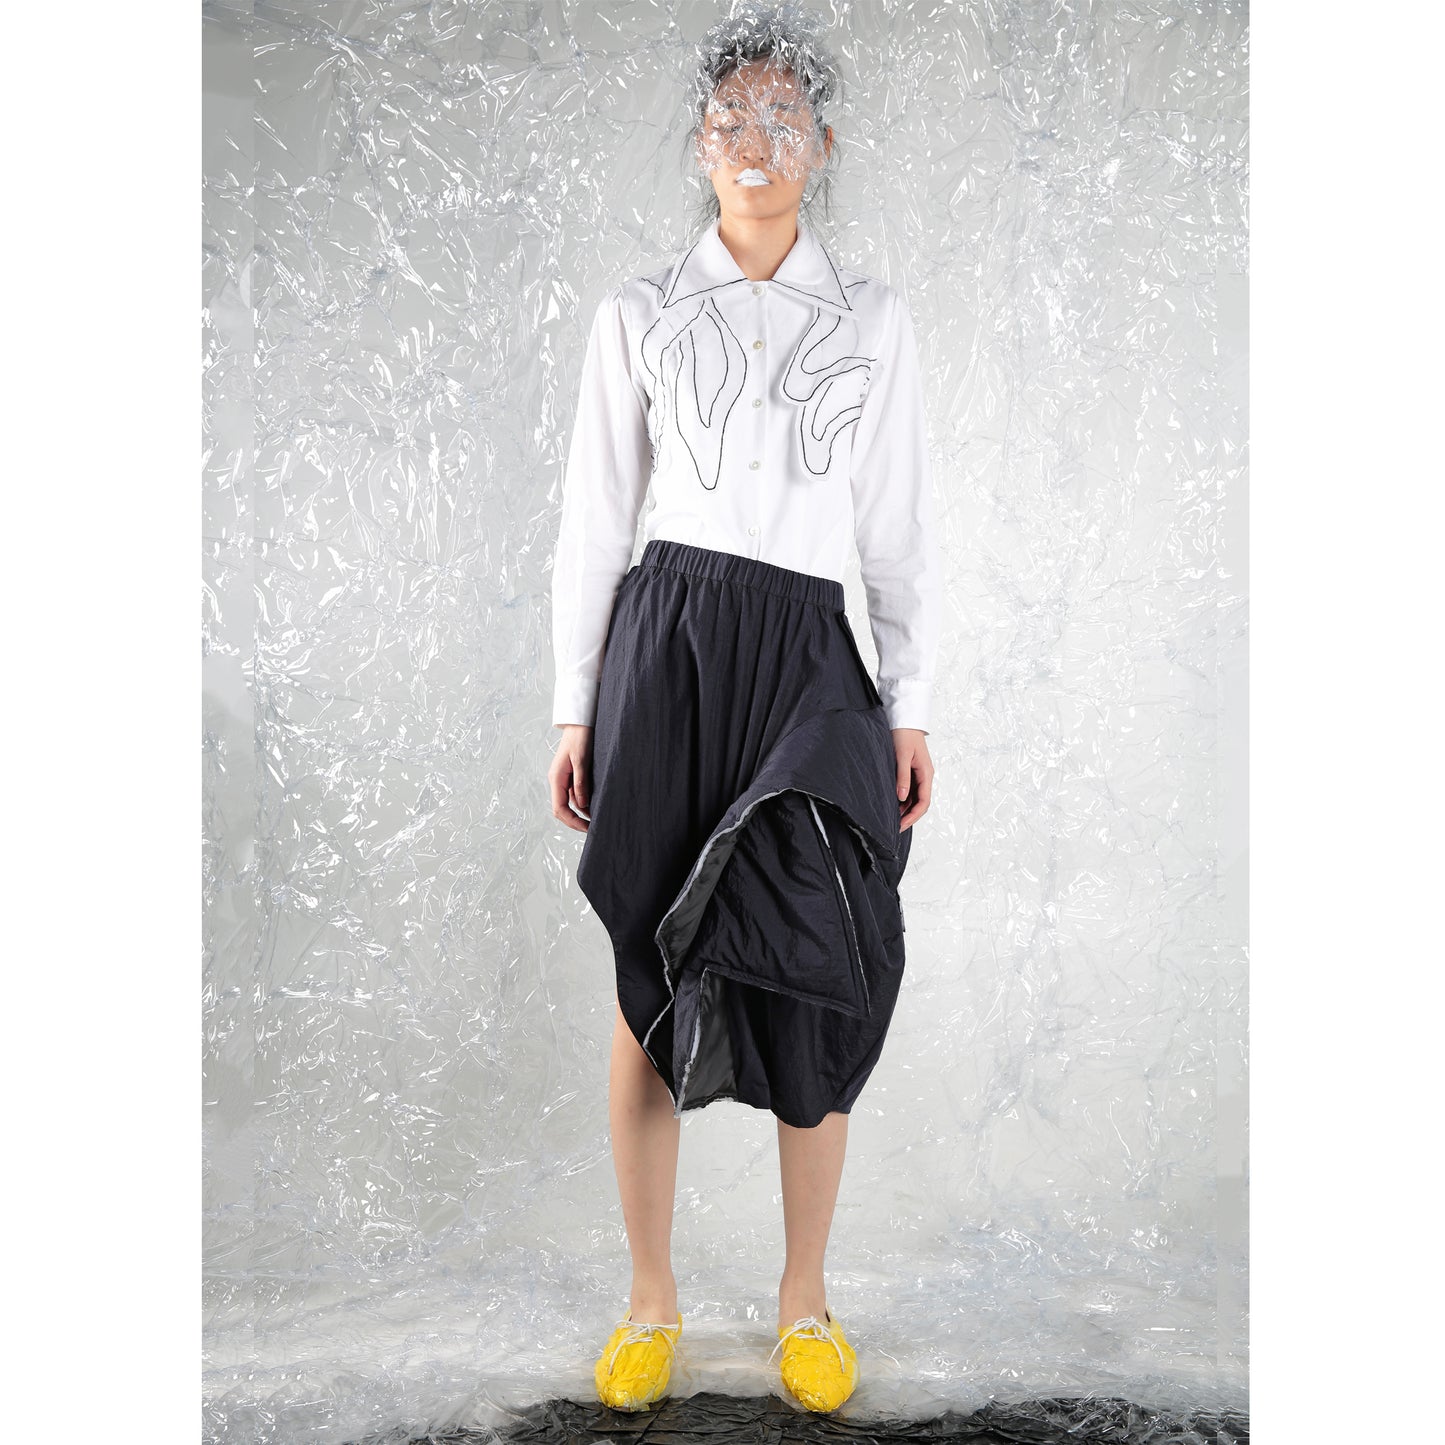 Skirt Asy Cut with Paddings - phenotypsetter, fashion designer label, unisex, women, accessories